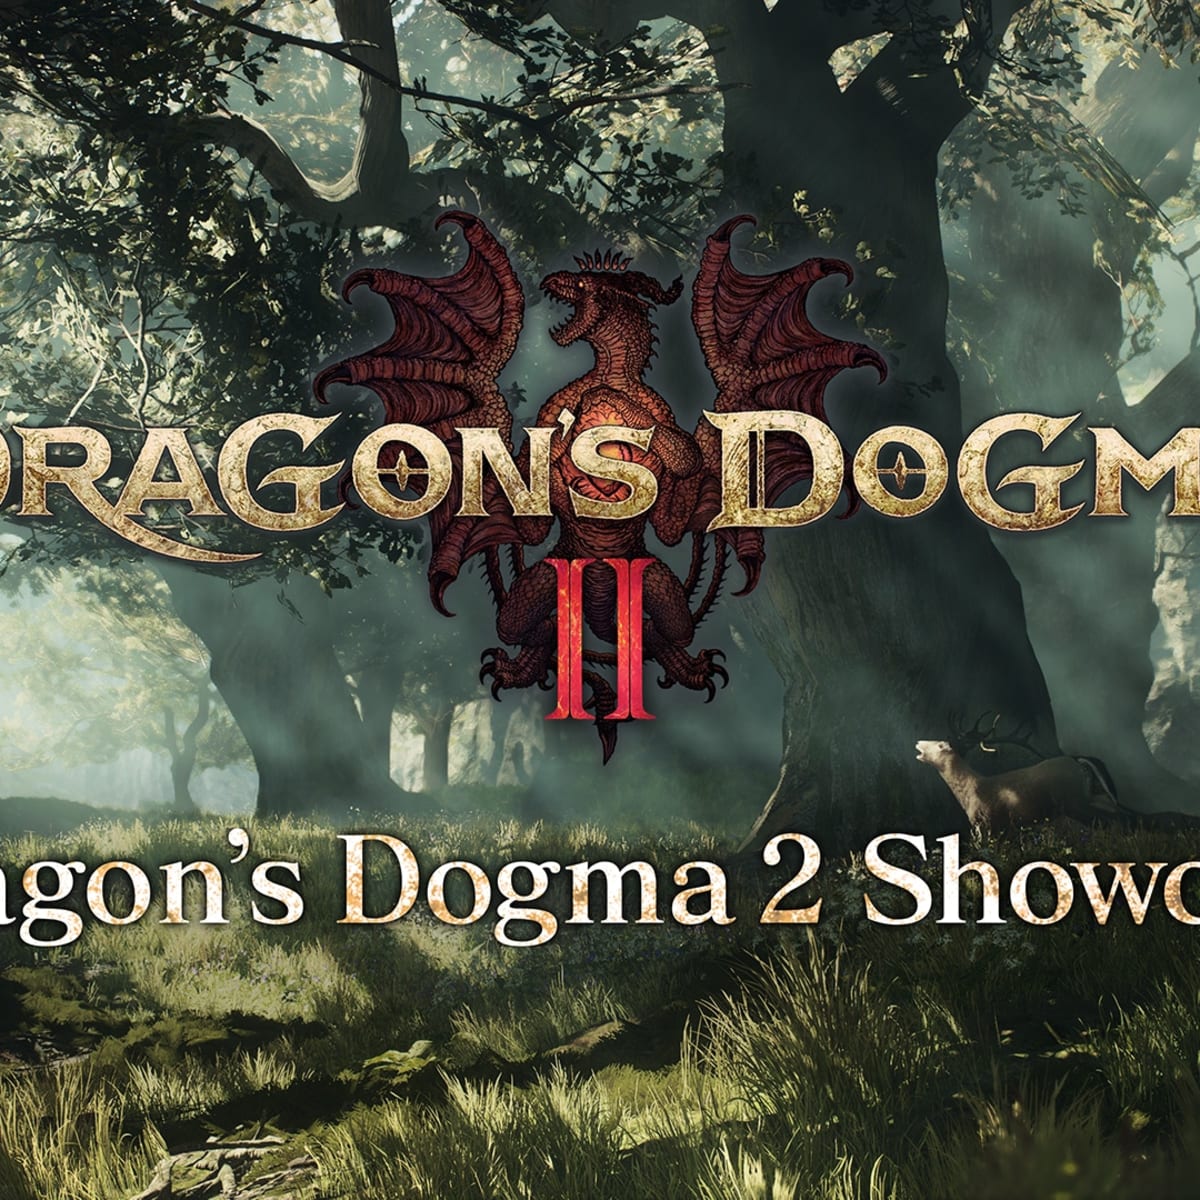 Dragon's Dogma 2 Steam Page Confirms Release Date Ahead of Planned